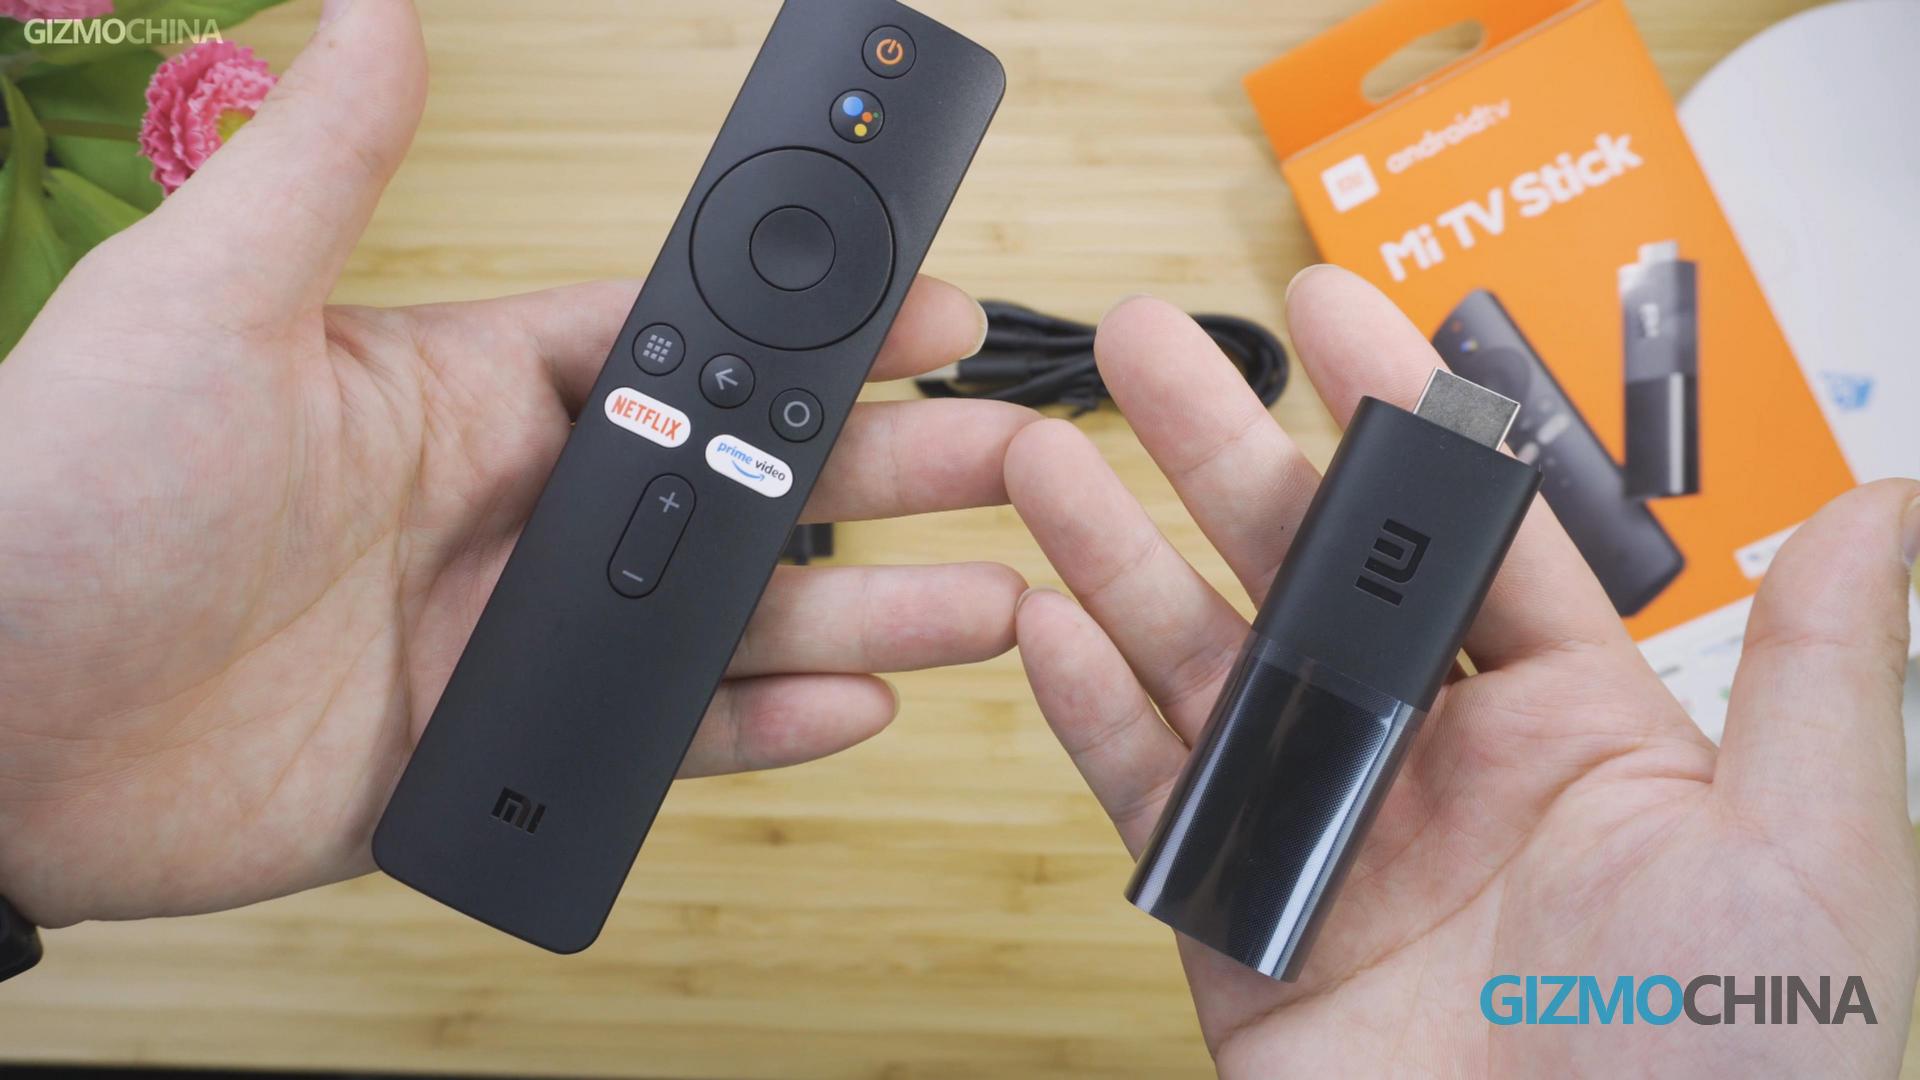 Xiaomi Mi TV Stick Review - Official Android TV OS - Any Good? REAL TRUTH!  